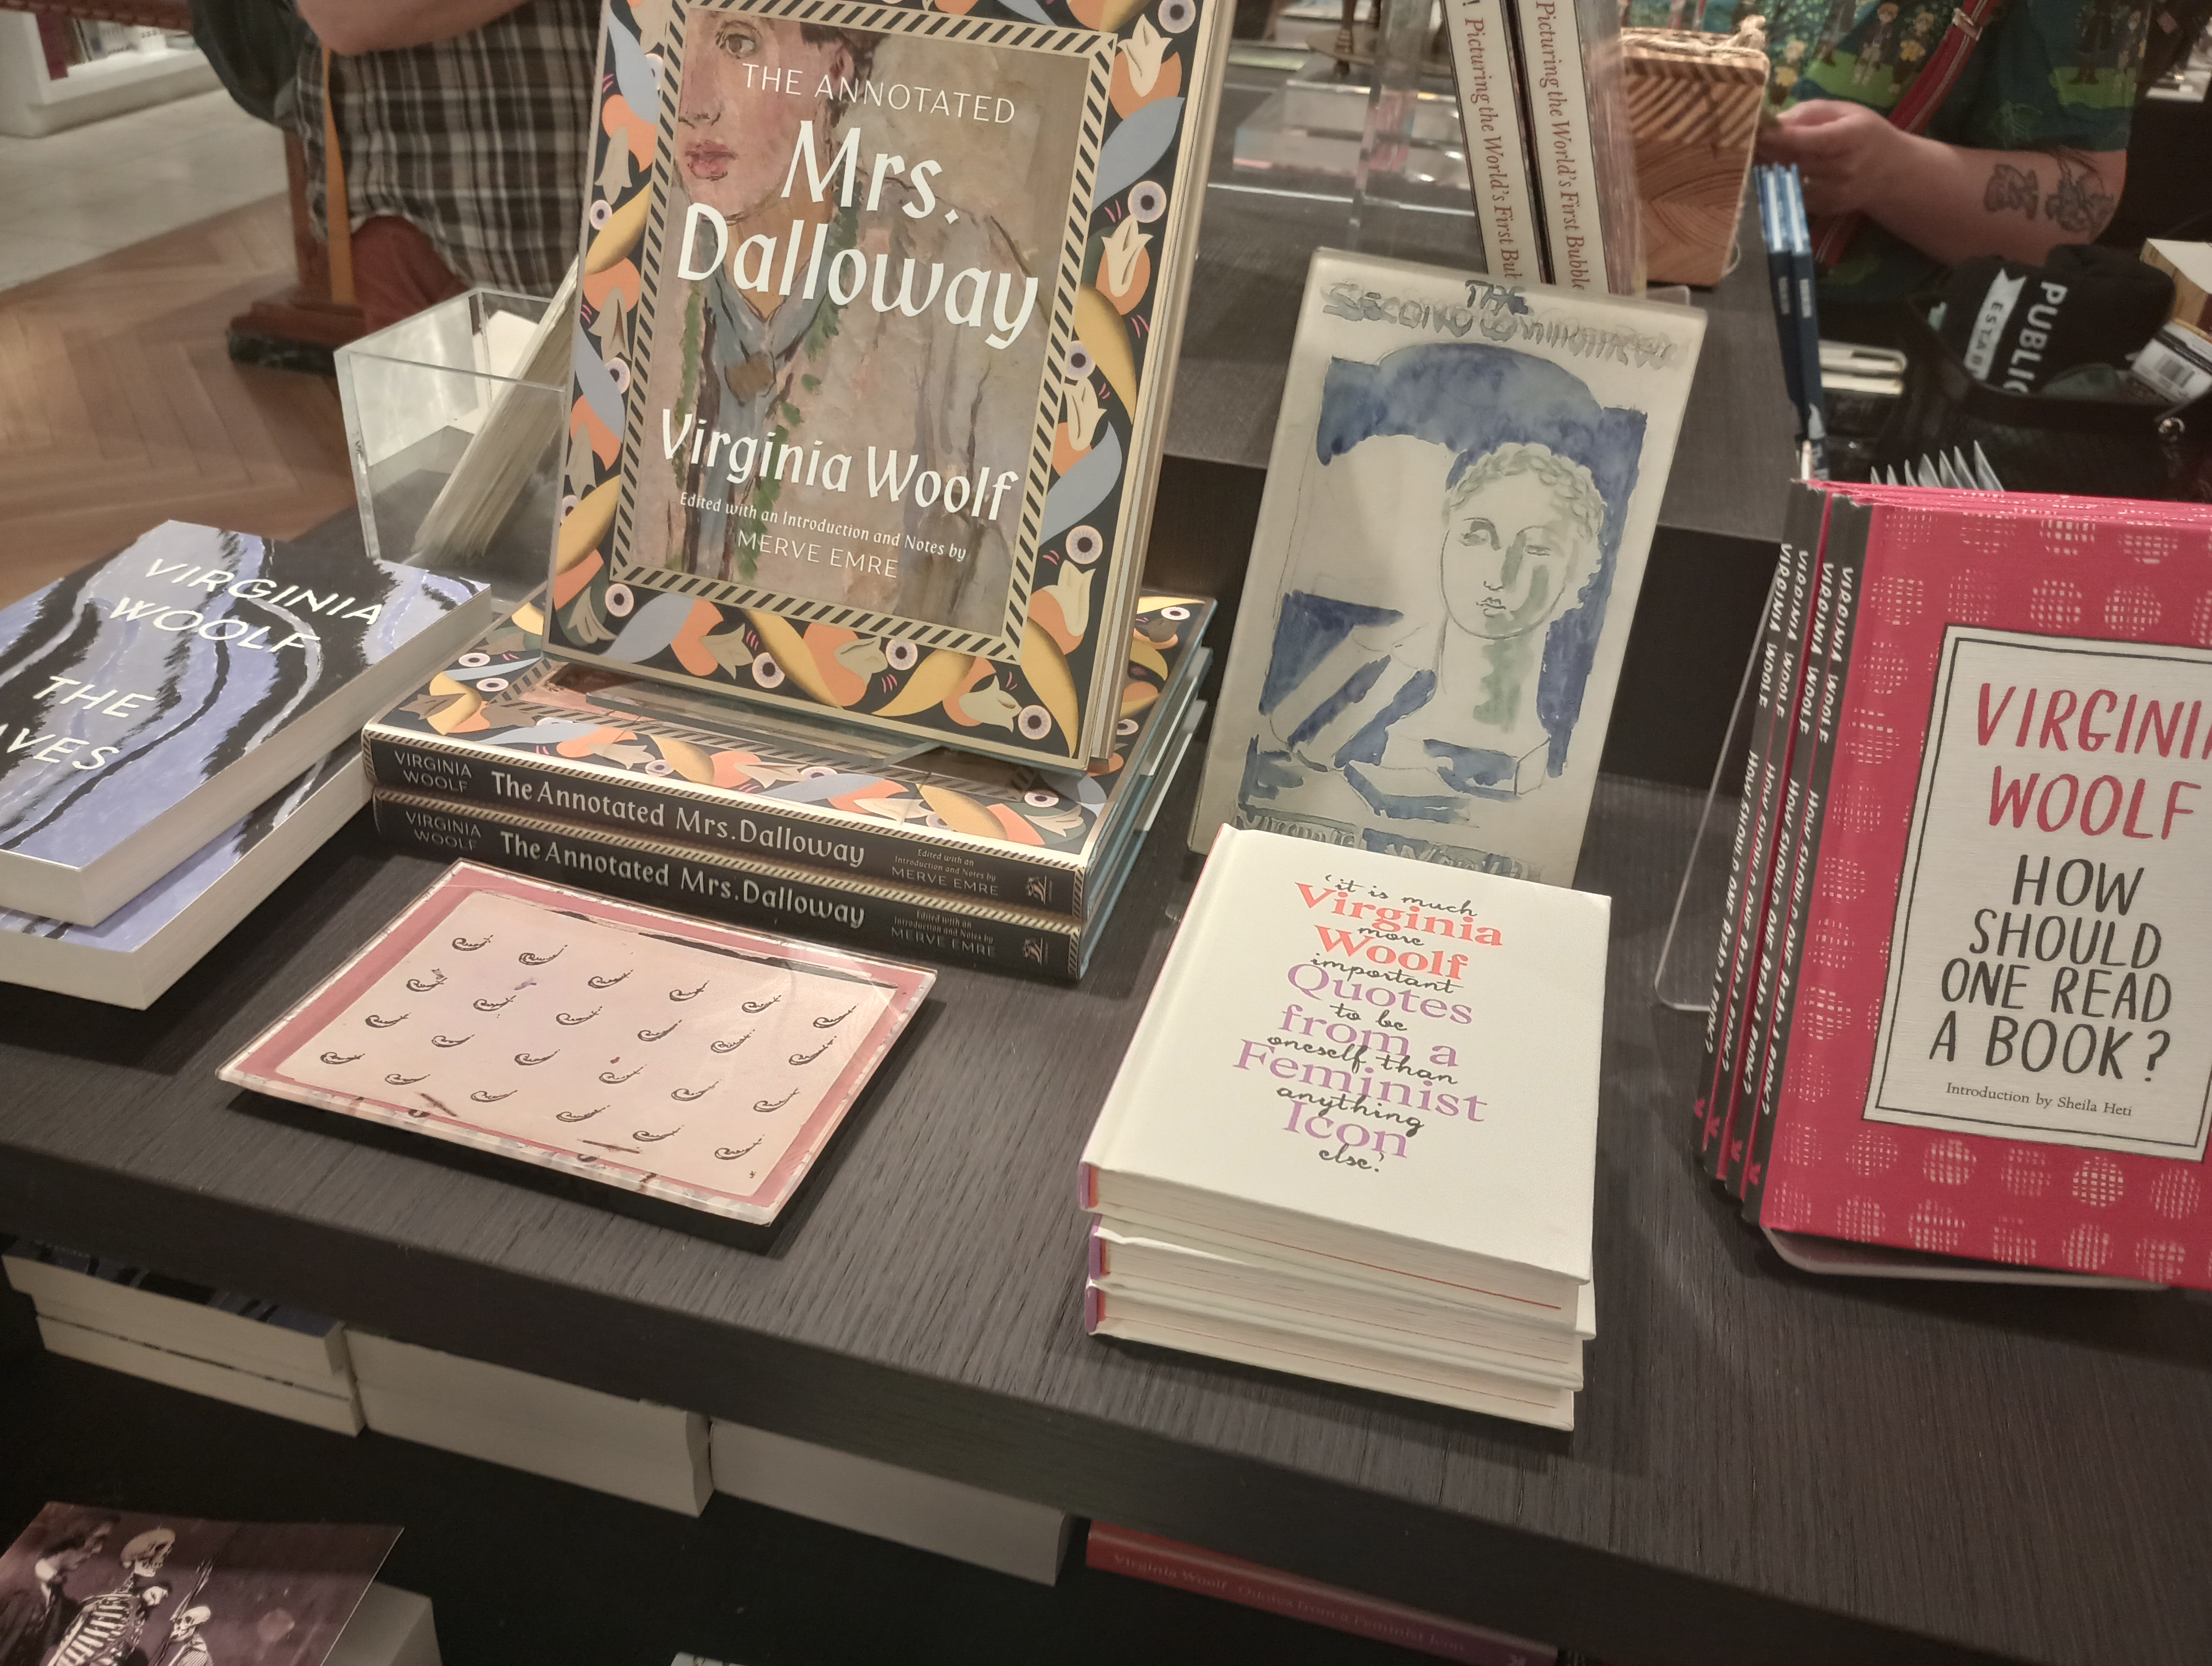 A display of books by and about Virginia Woolf in the New York Public Library giftshop. 